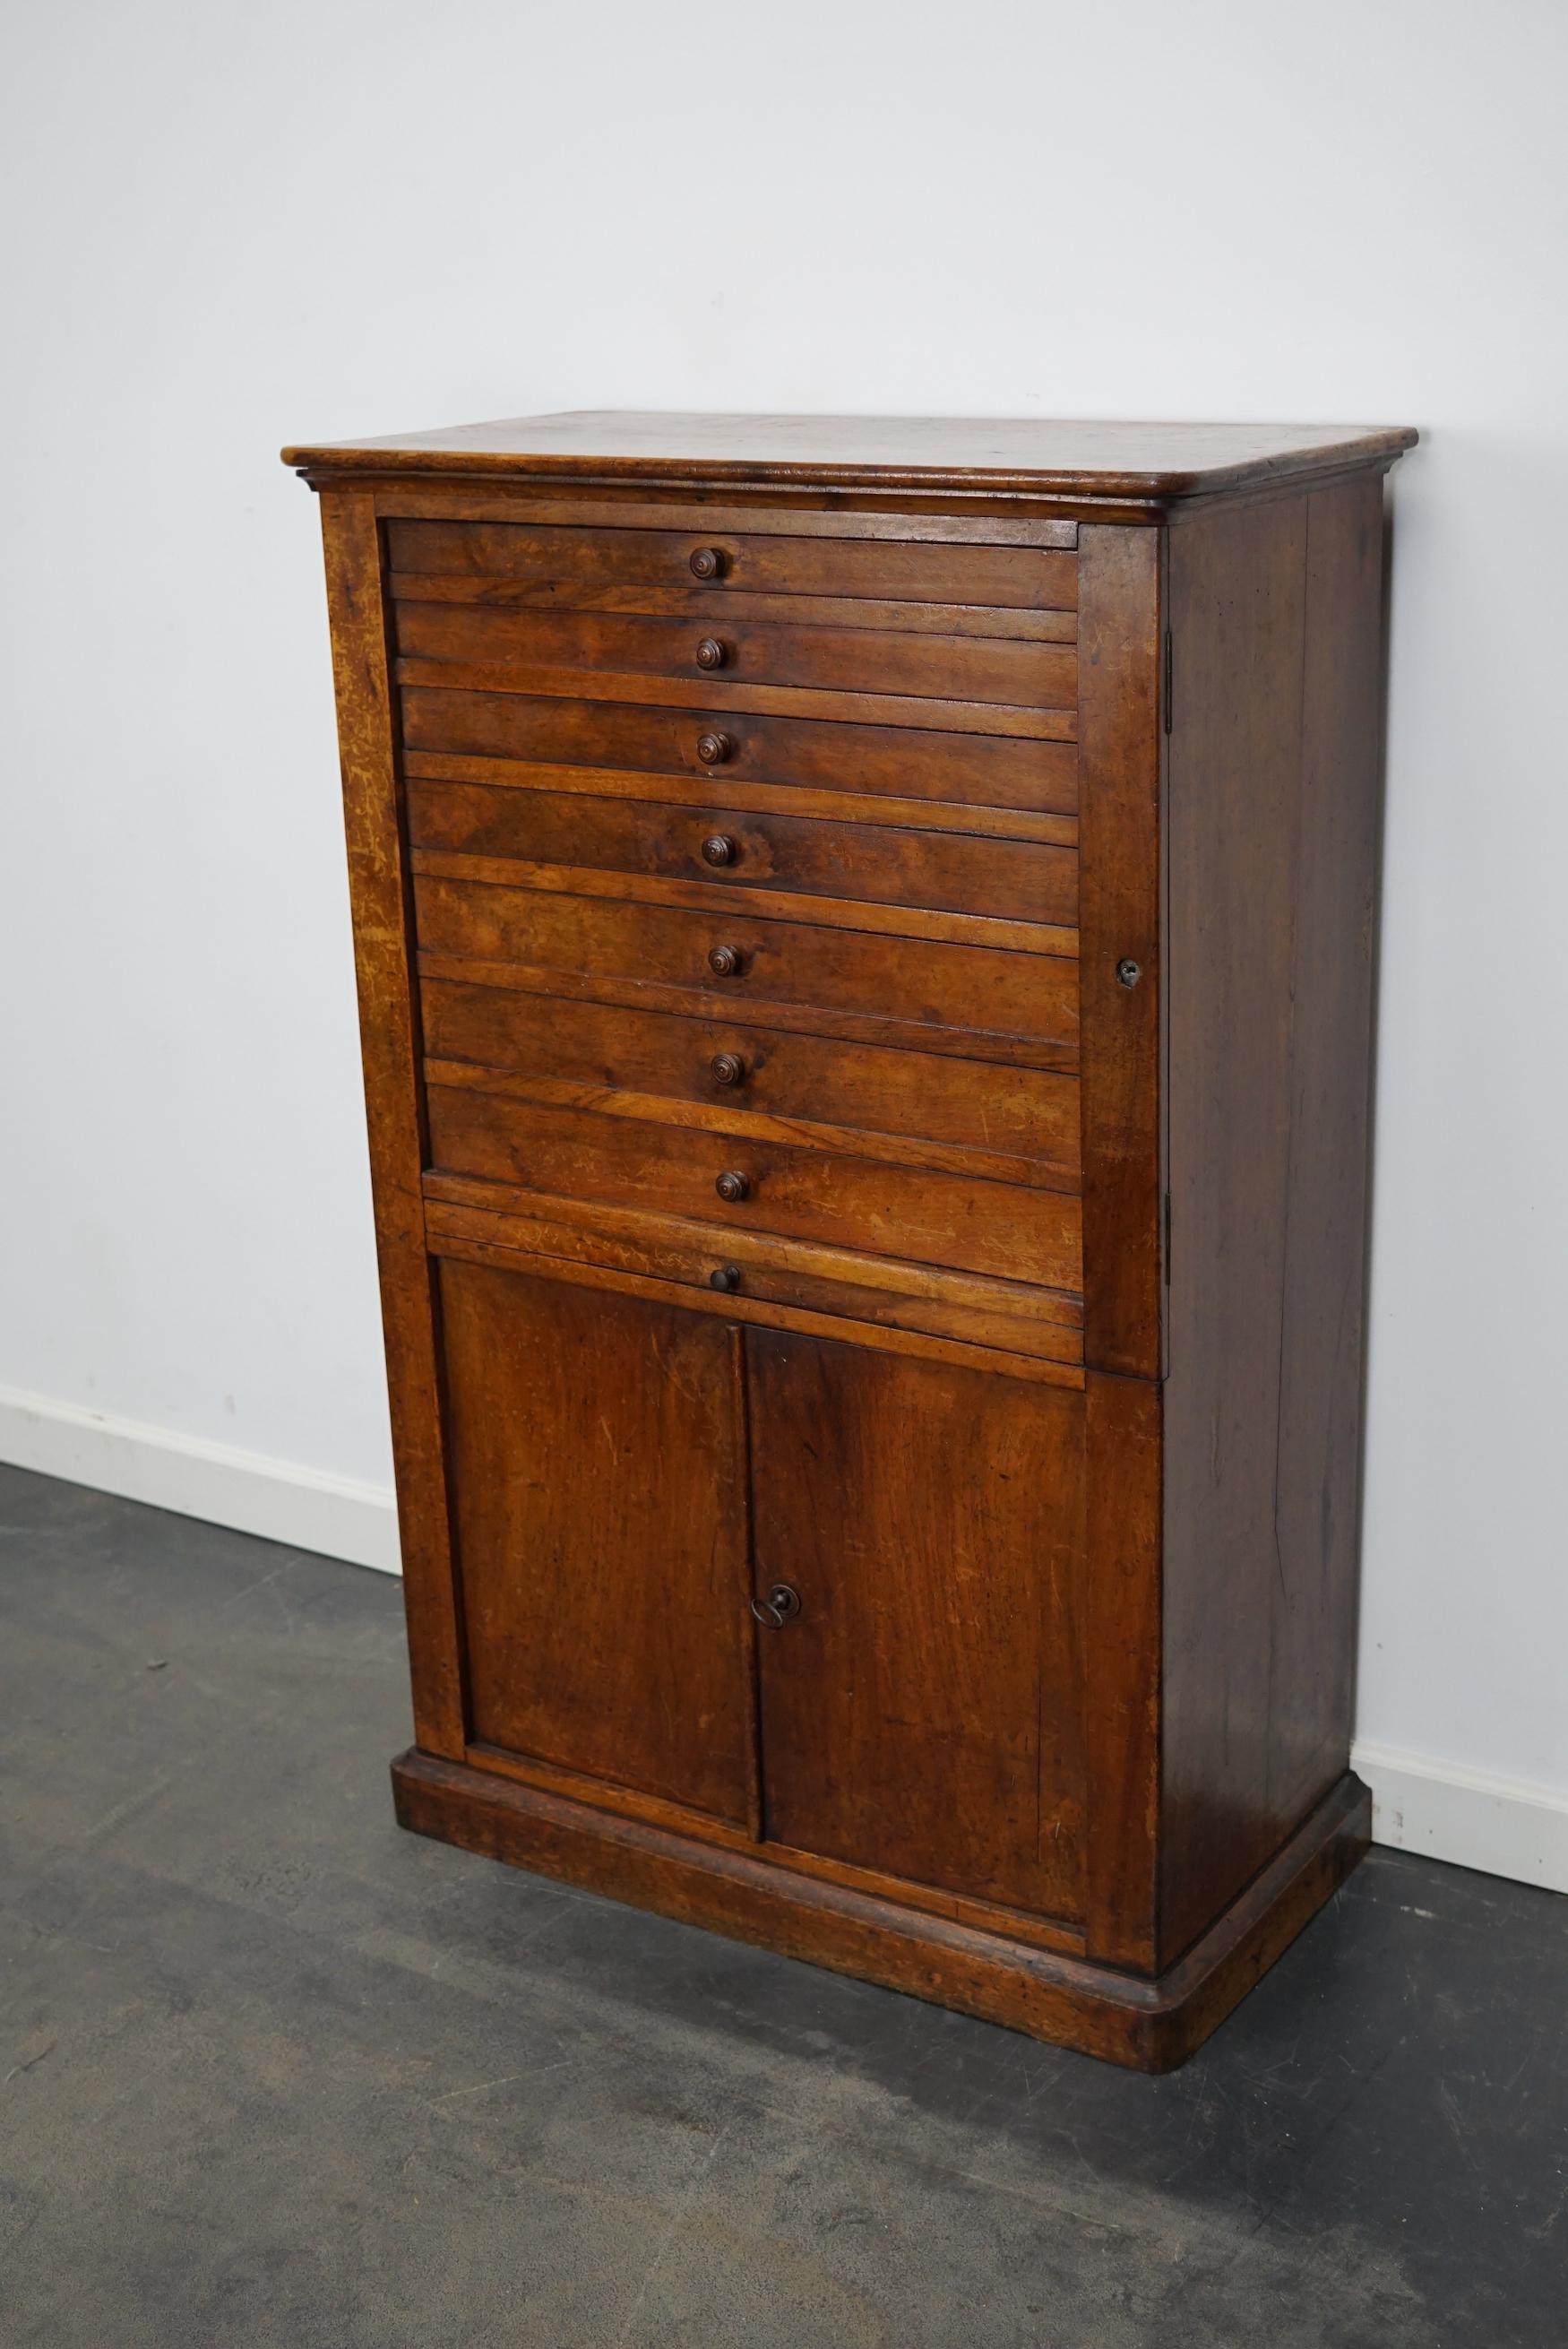 This clock / watchmakers cabinet was designed and made in the early 20th century in France. It features 7 walnut fronted drawers in different sizes: DWH 23.5 x 48 x 2 / 3 / 3.5 / 4 / 4.5 cm.